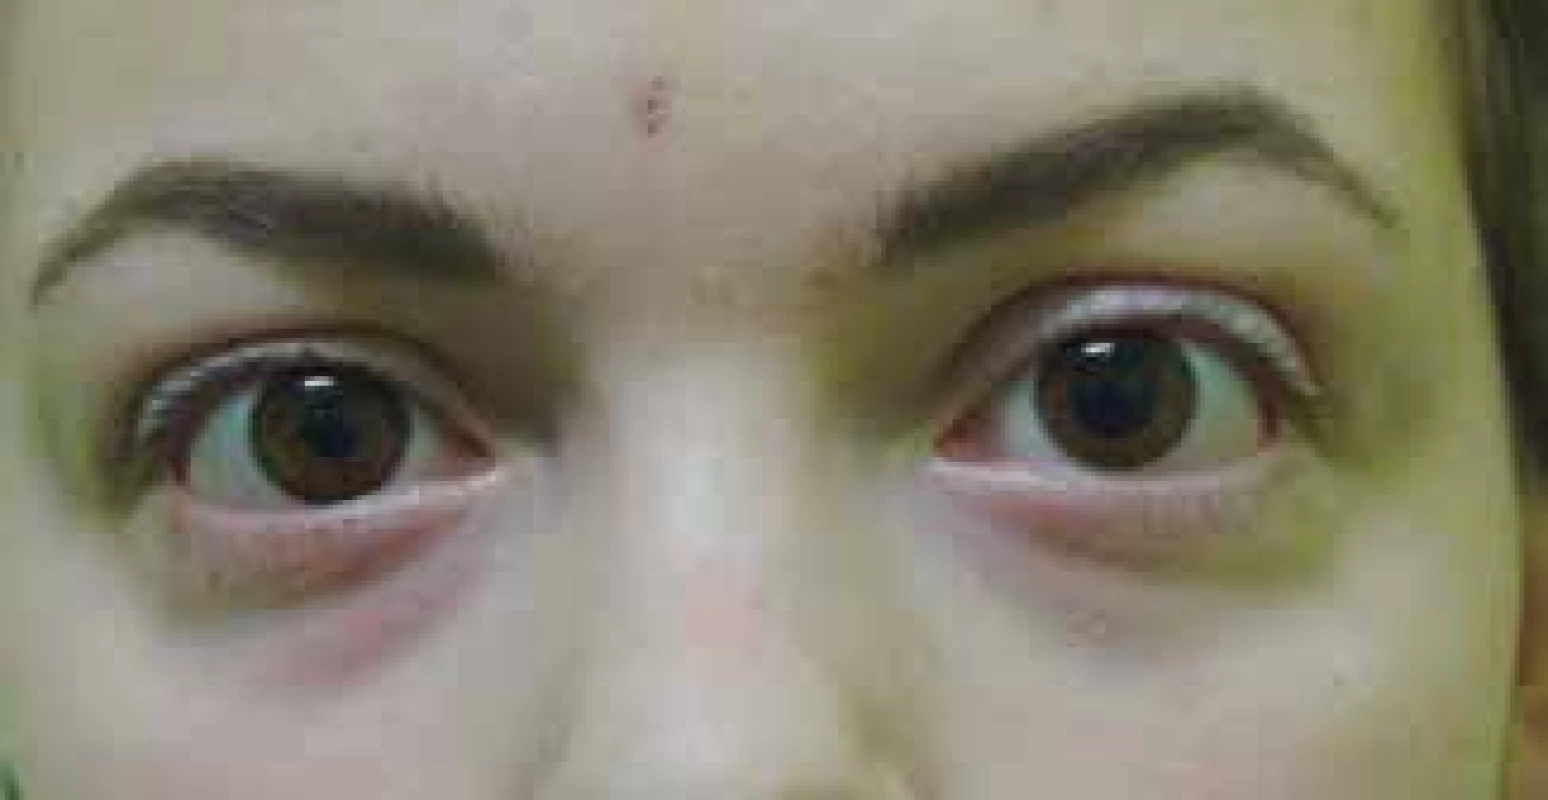 Mydriasis in left eye more pronounced in dark conditions